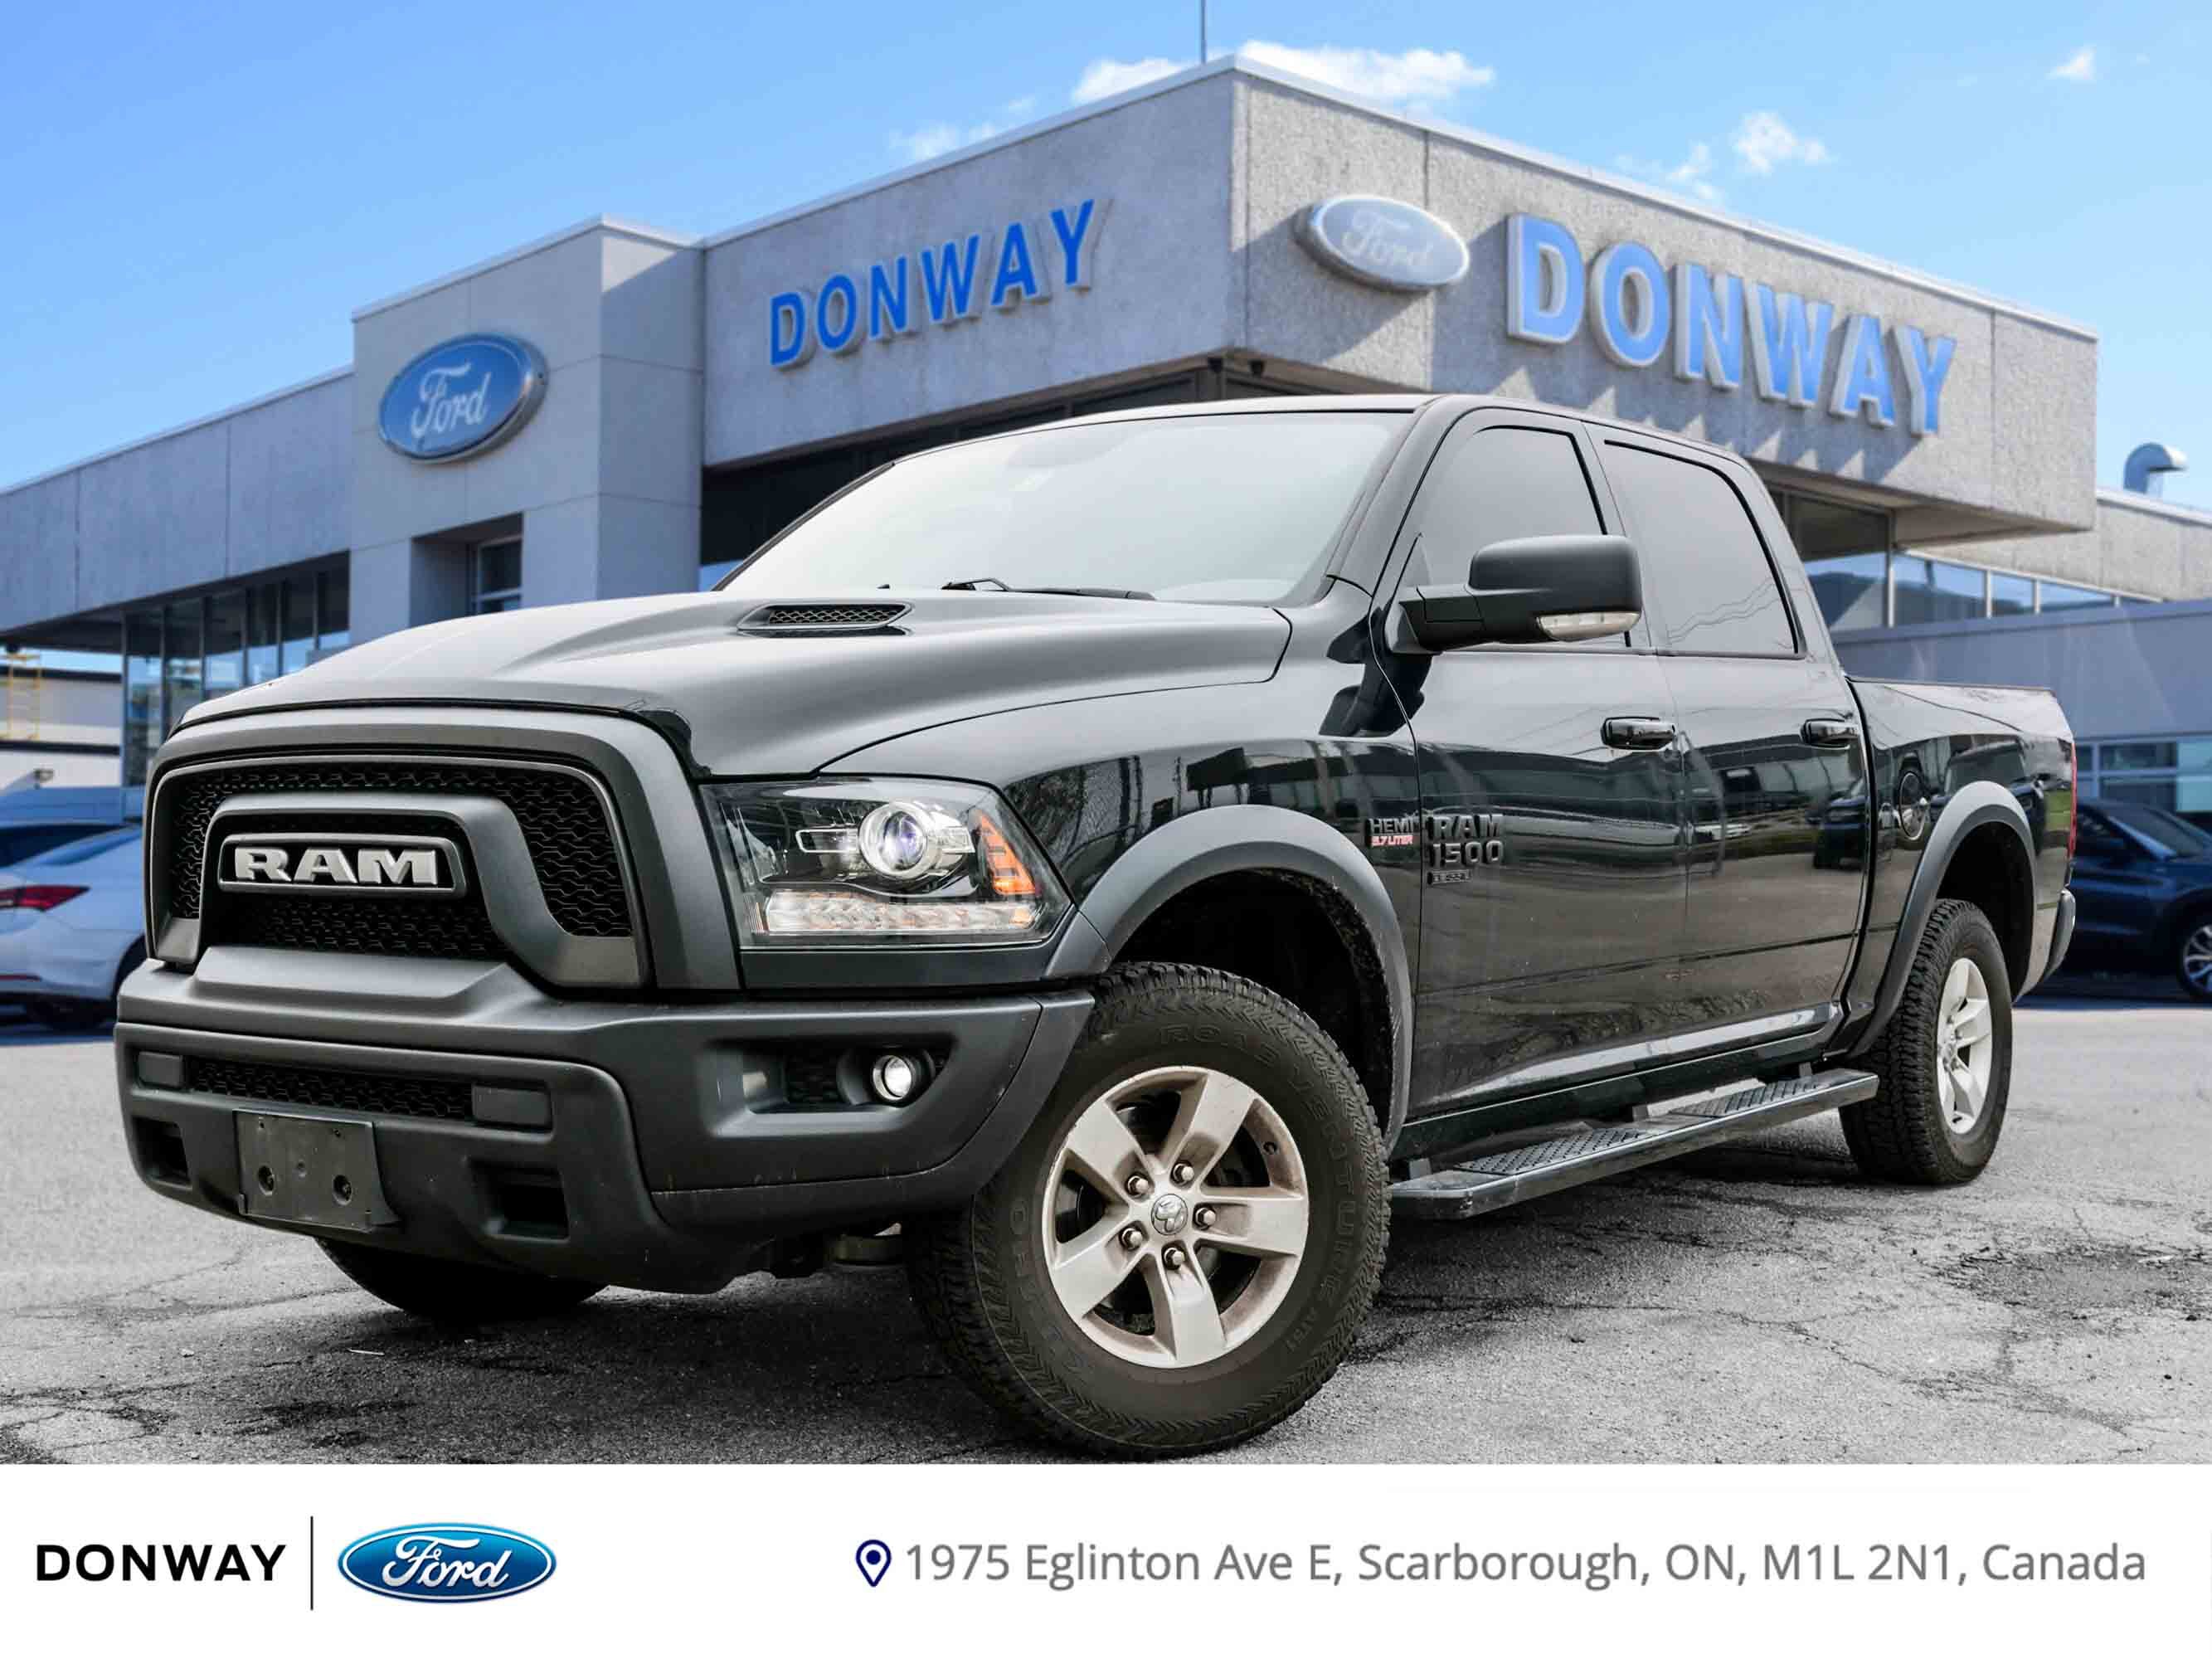 2019 Ram 1500 Crew Cab WARLOCK|5.7L V8|4X4|ONE OWNER|NO ACCIDENTS!